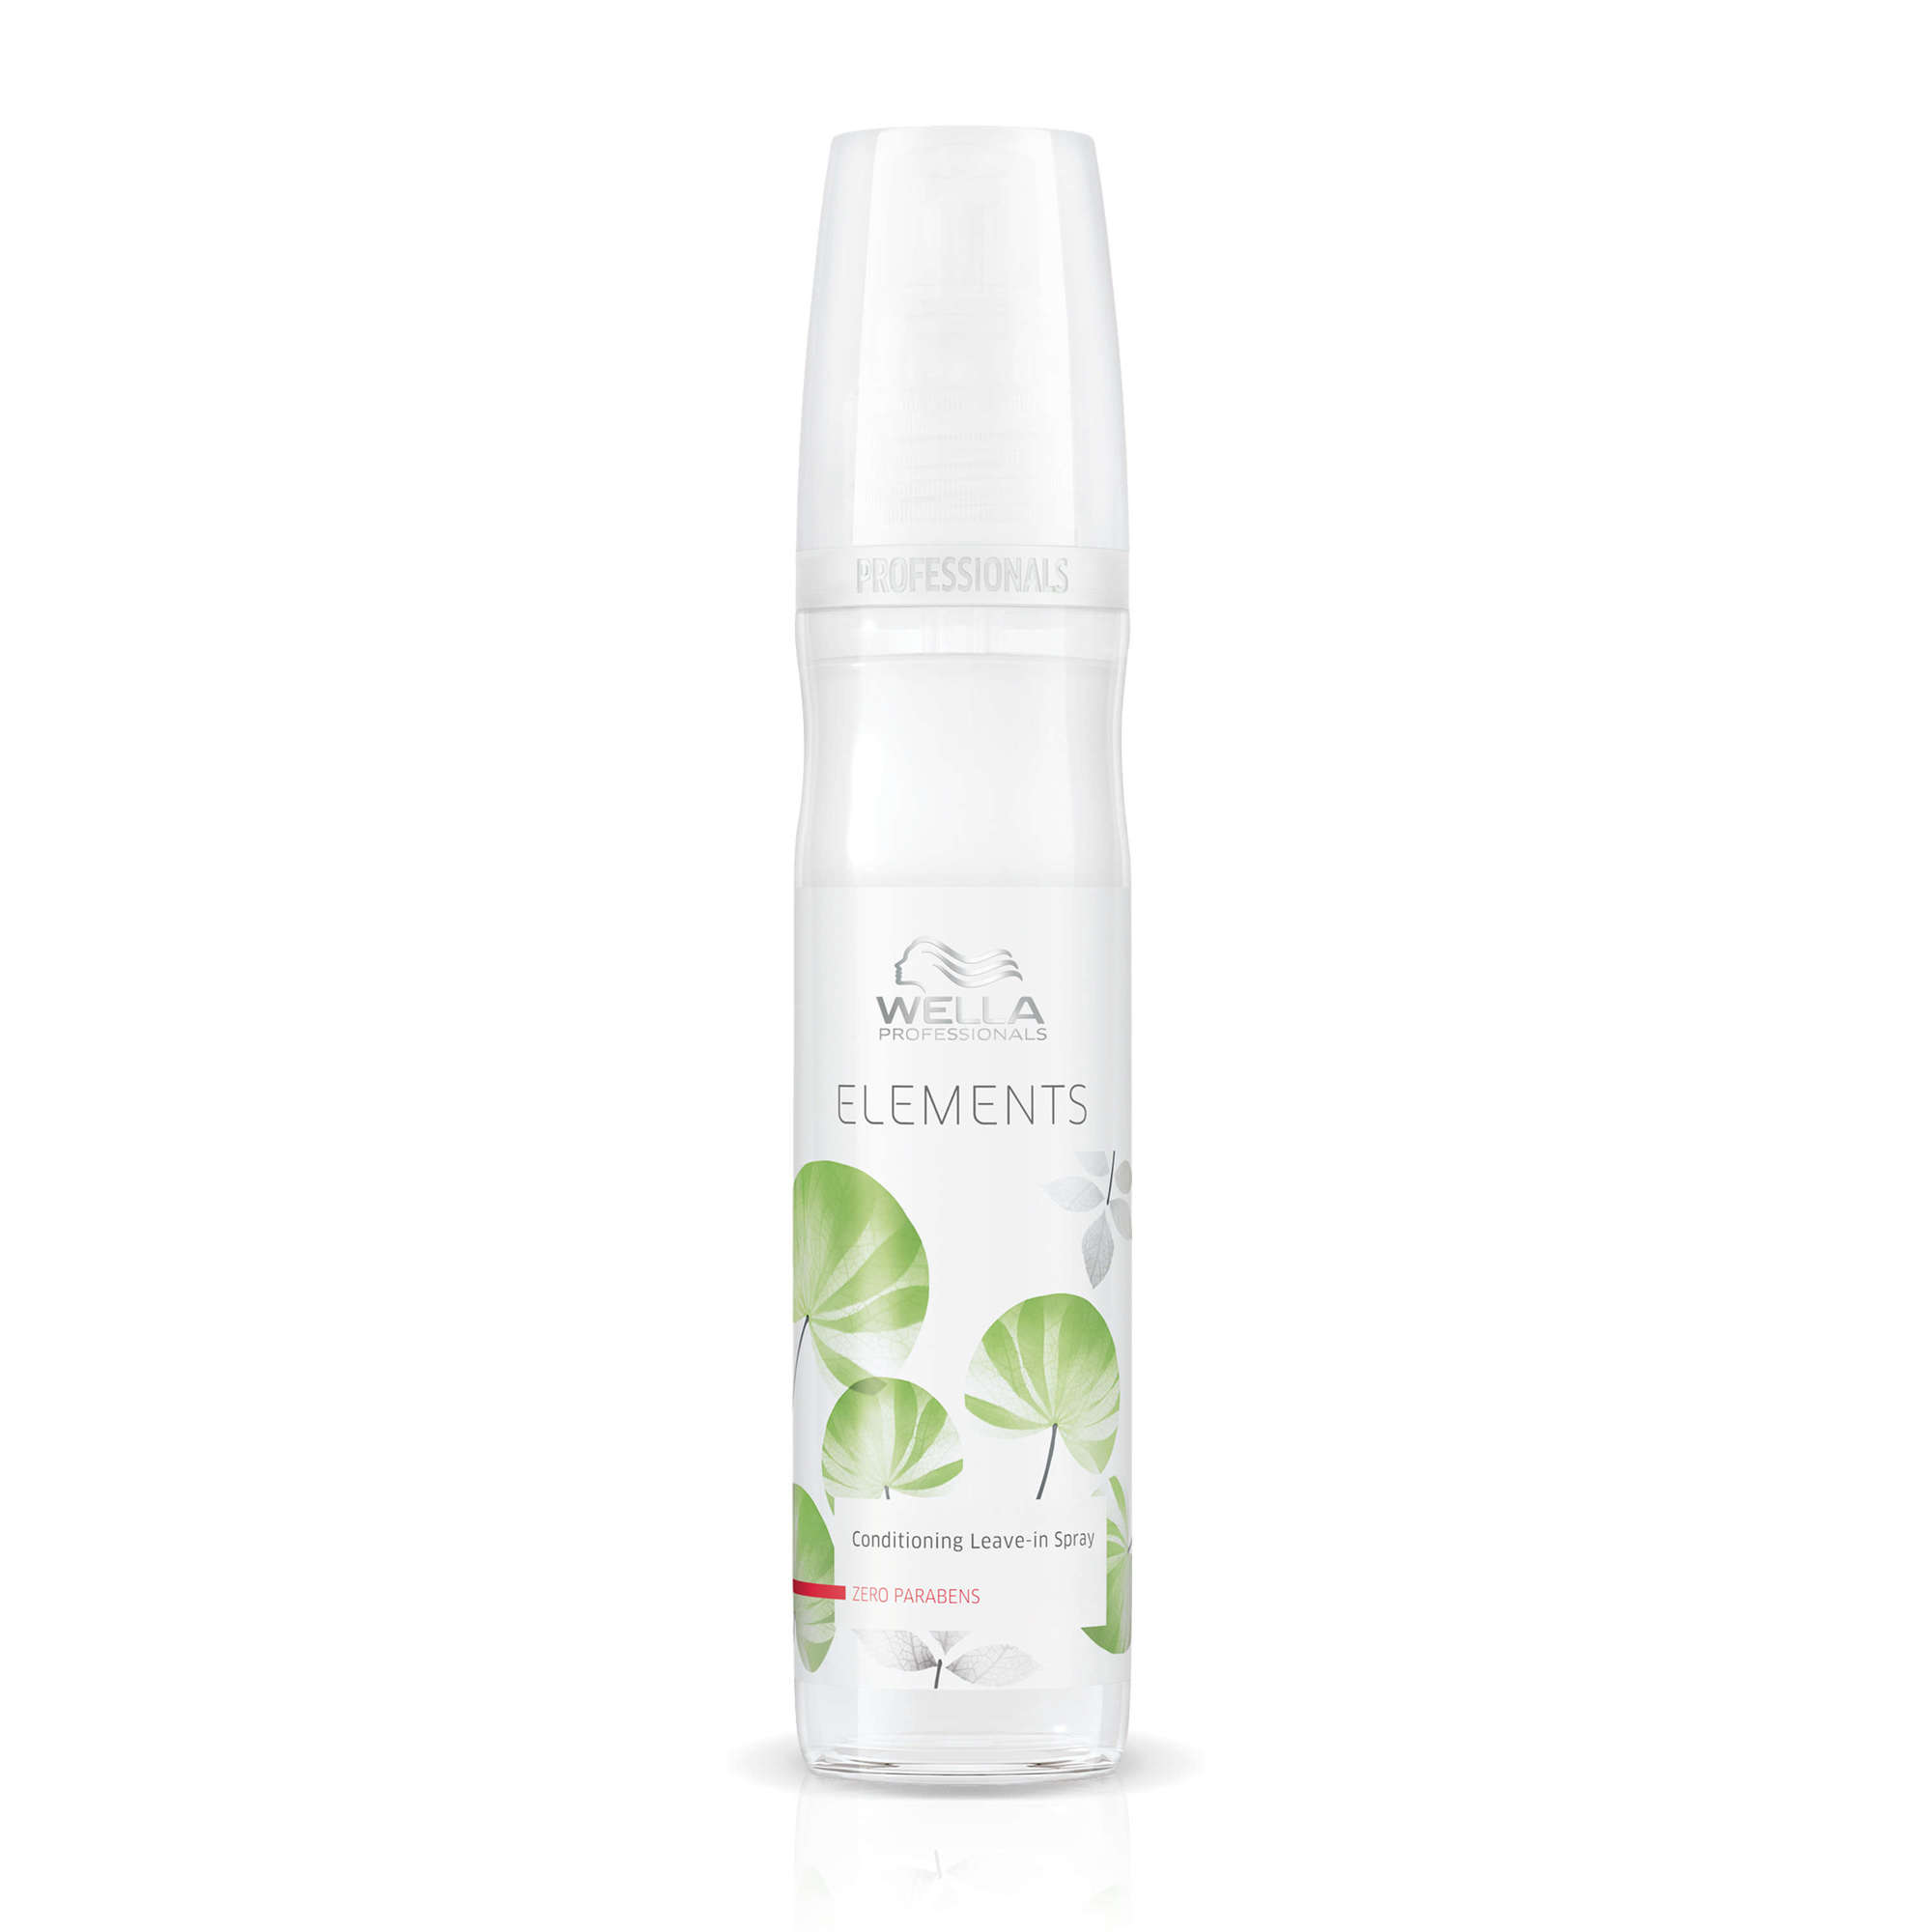 Wella Professionals Elements Lightweight Conditioning Leave-In Spray